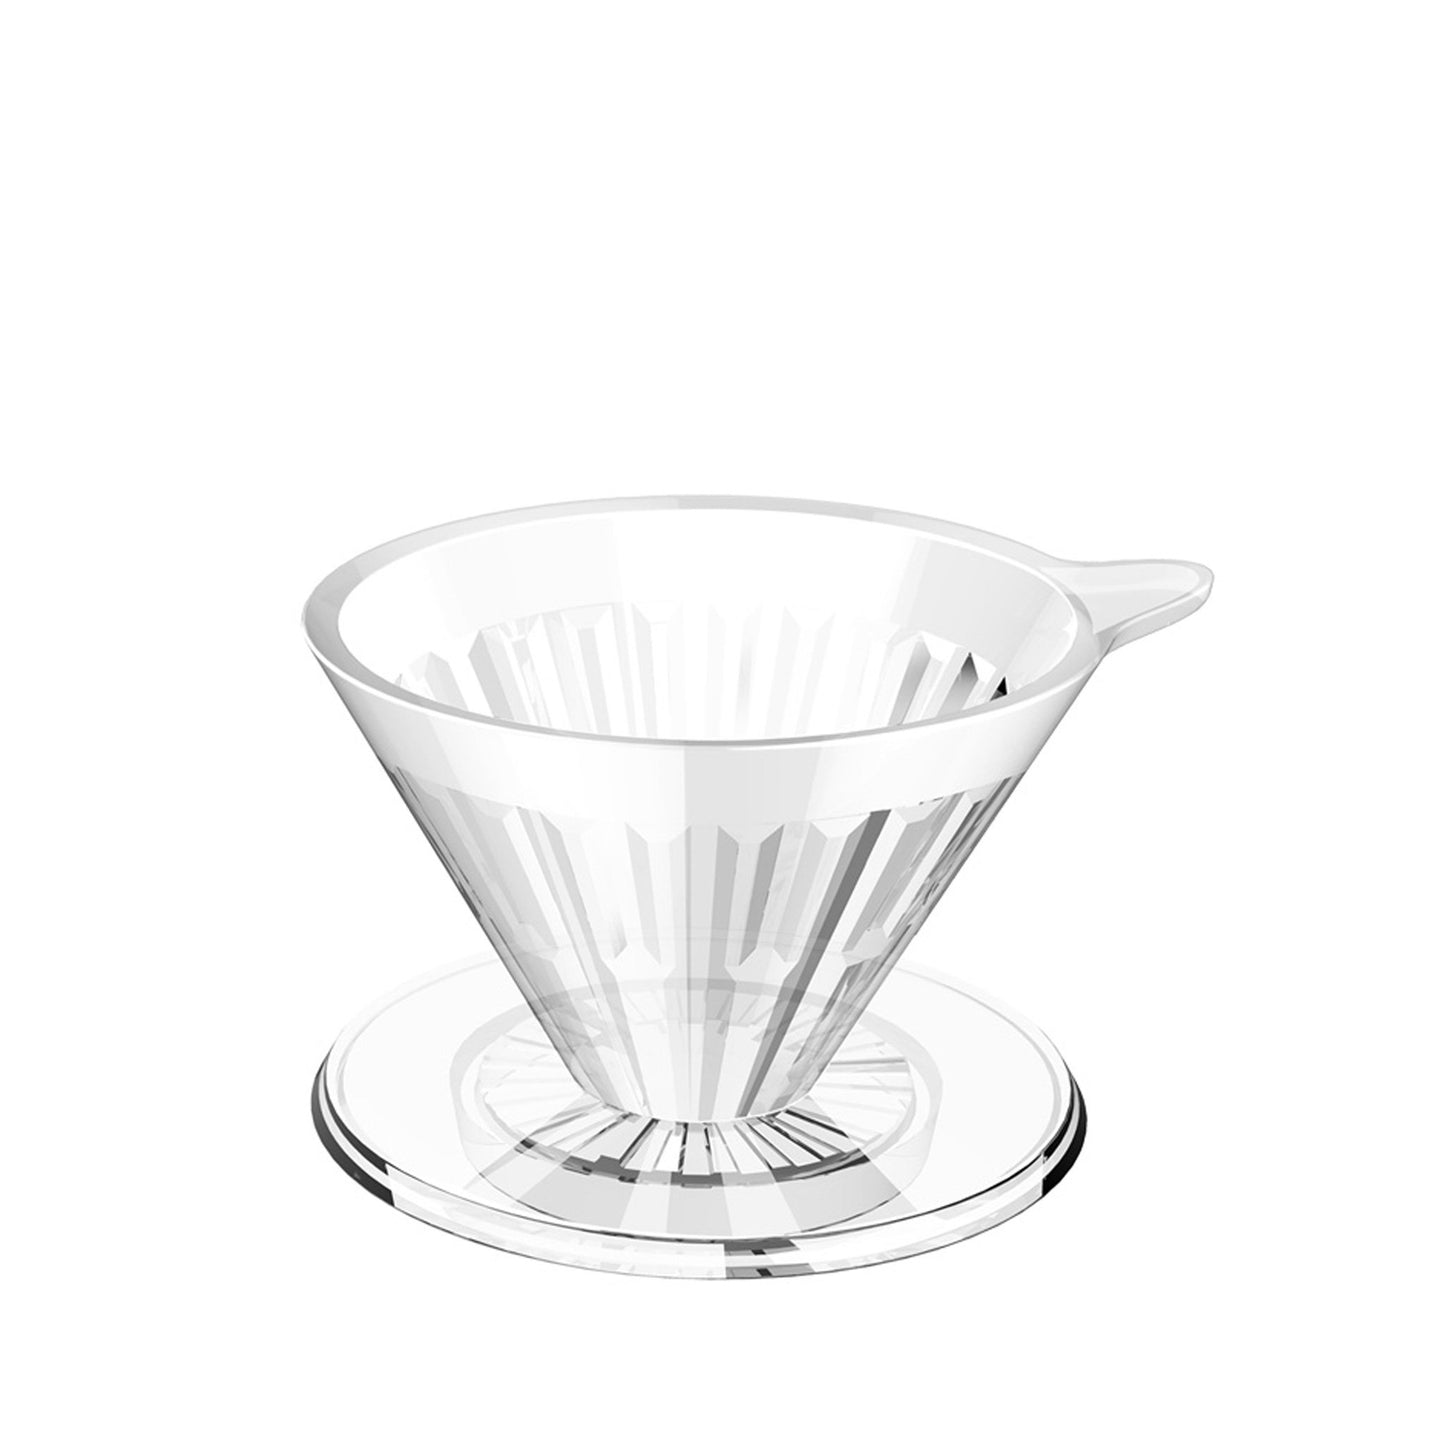 Timemore Crystal Eye Dripper 02 PCTG (2-4 Cups)